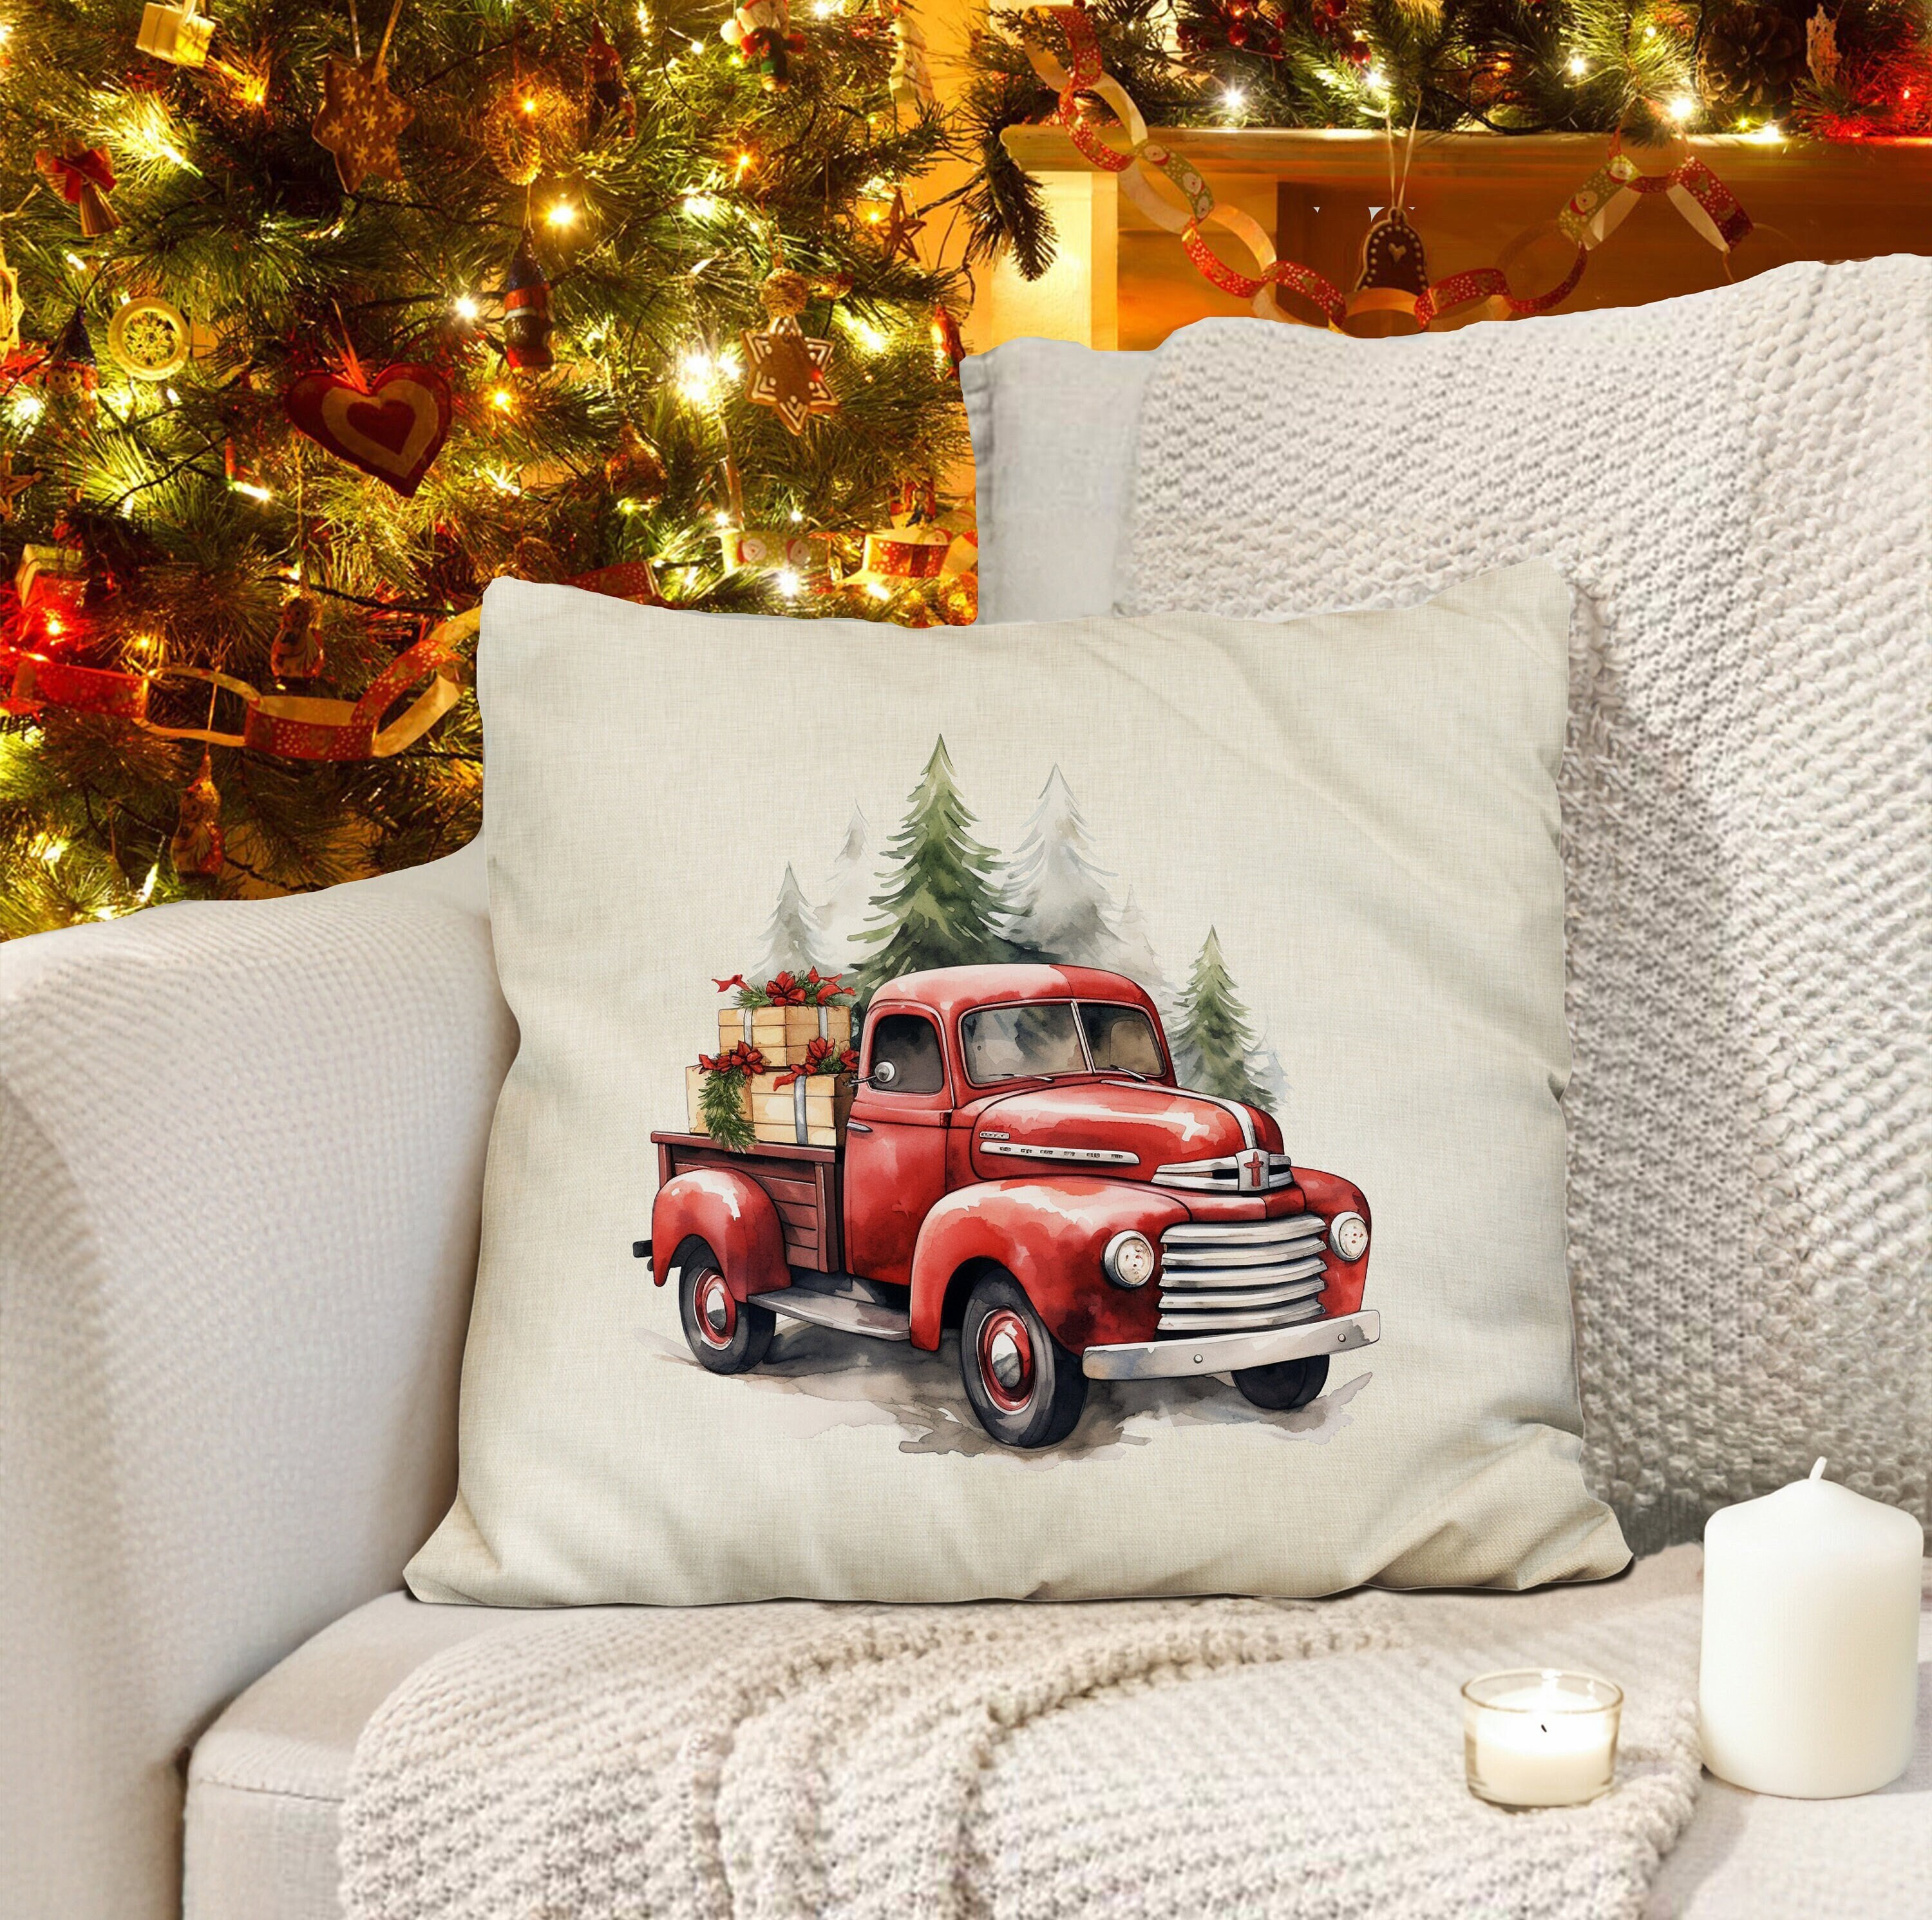 Classic Fall Vintage Truck Personalized Large Throw Pillow